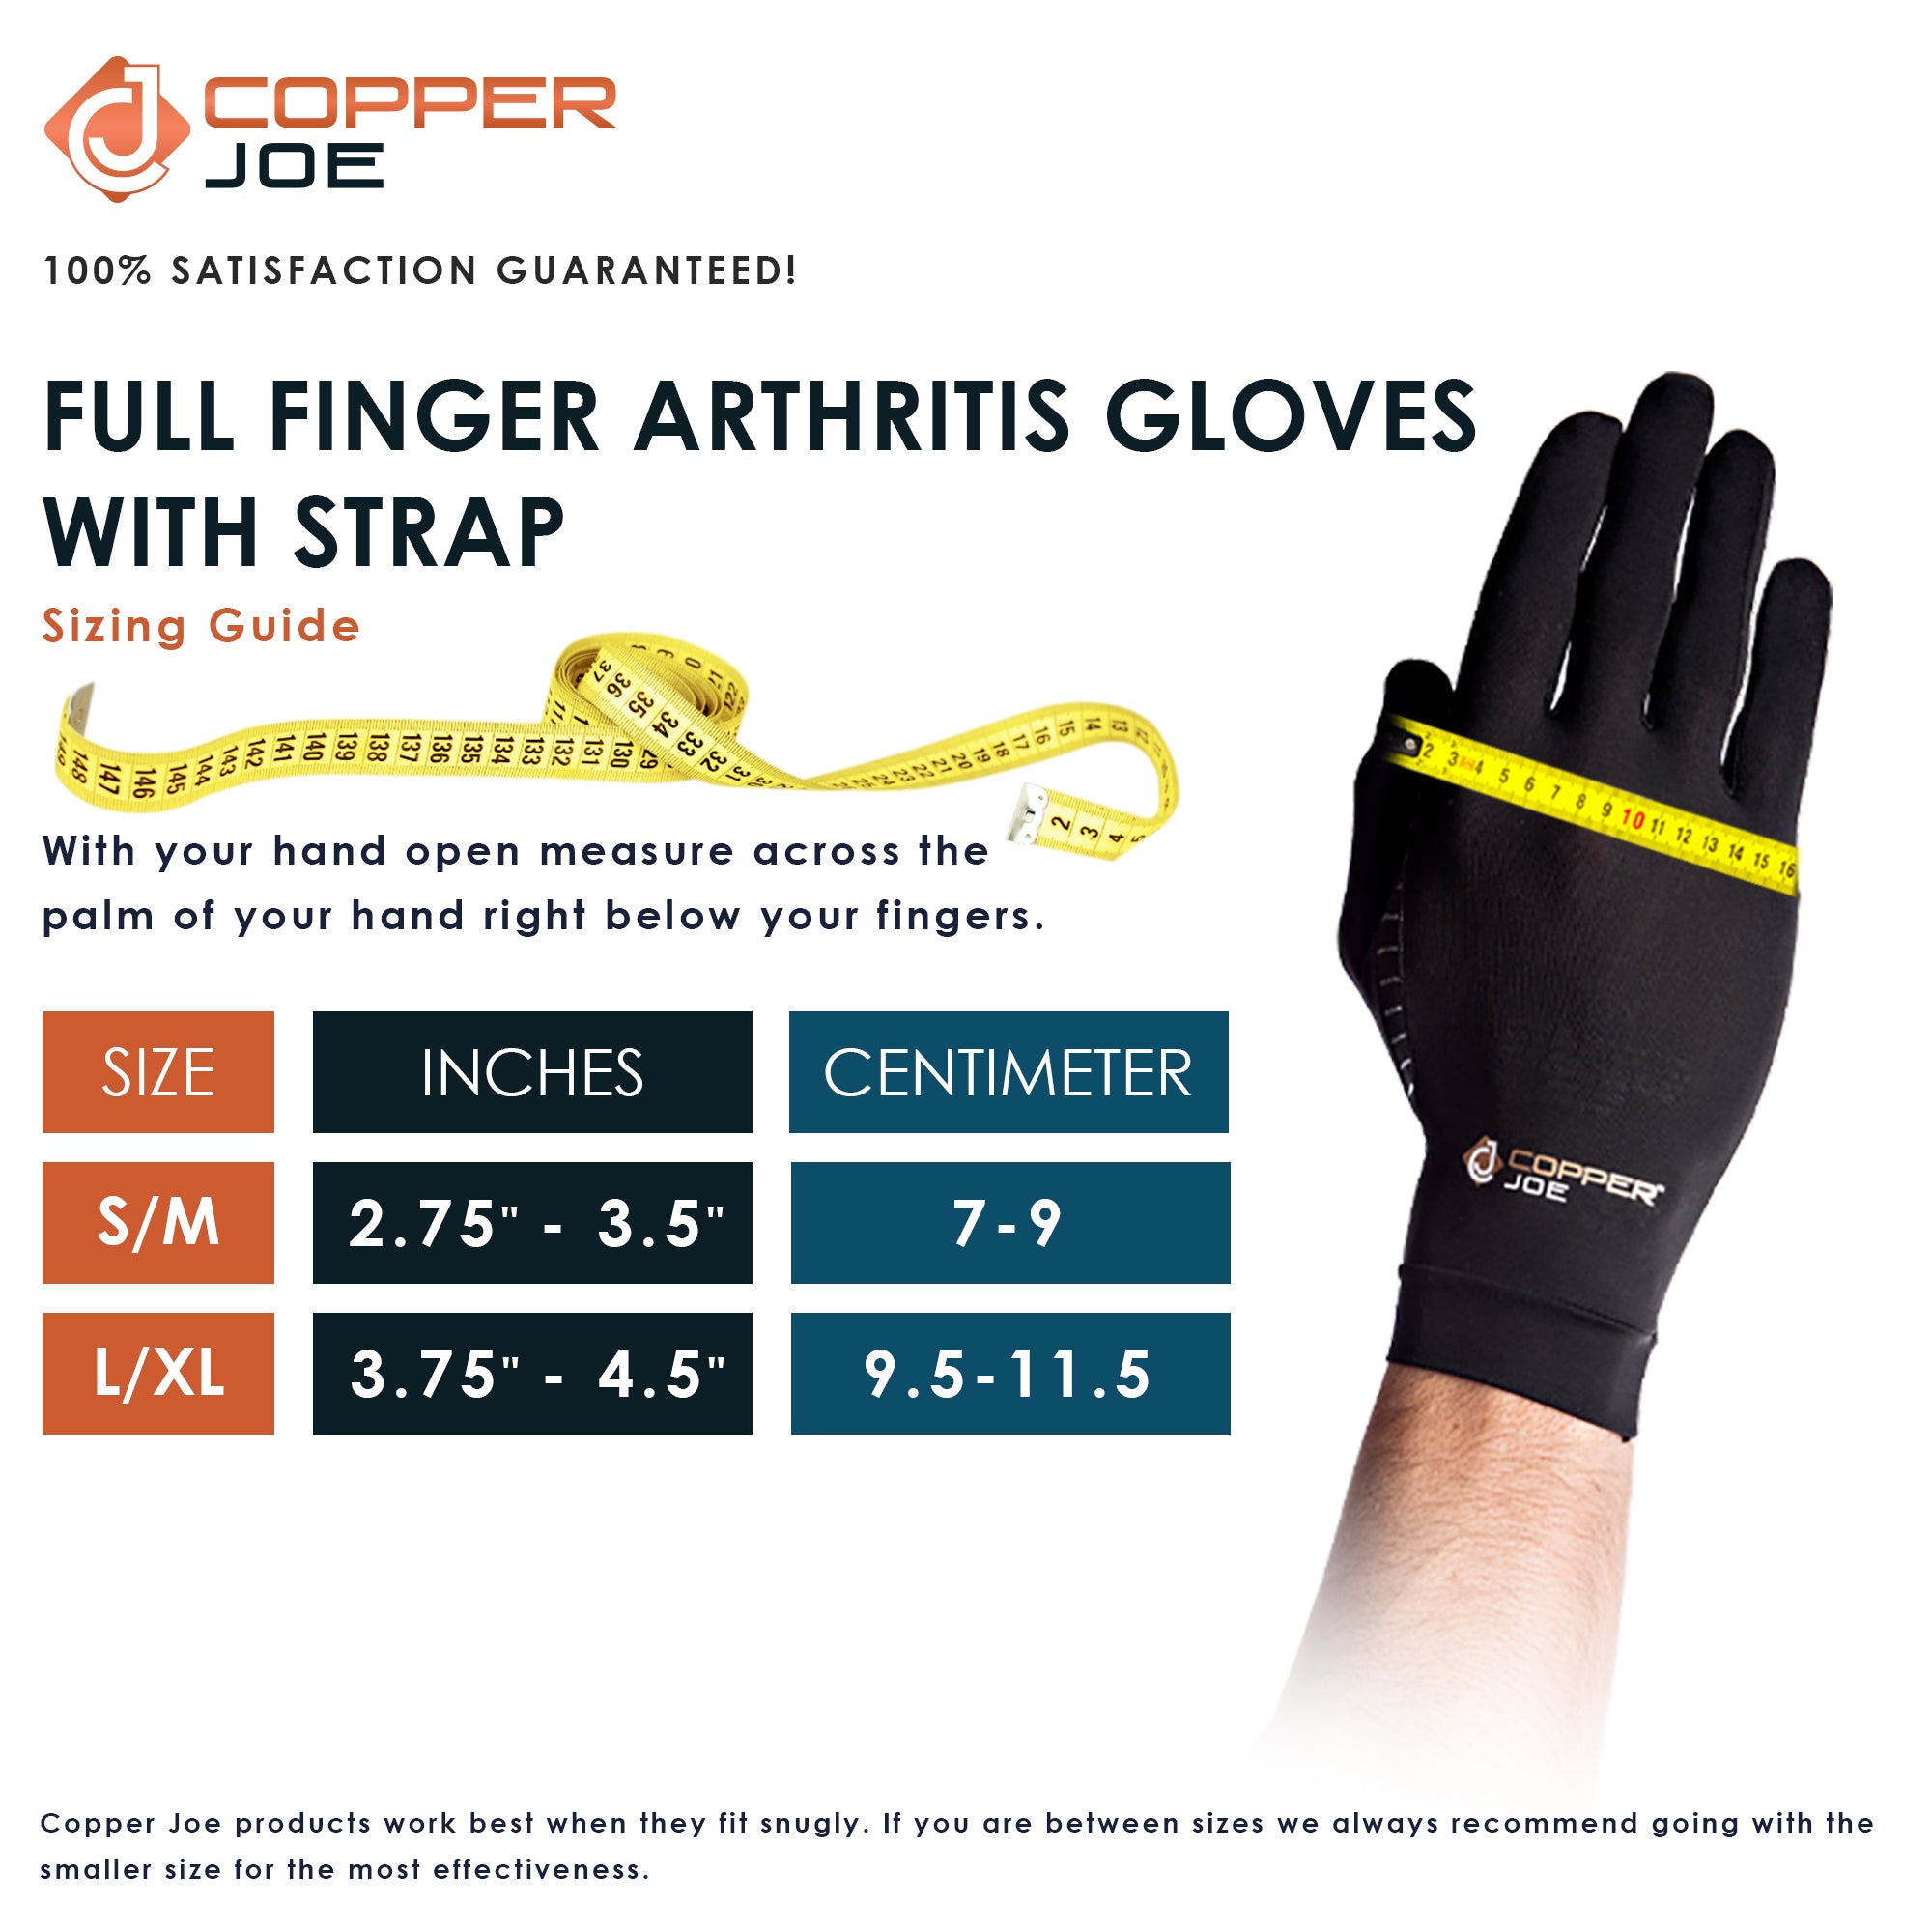 Copper Joe Full Finger Arthritis Gloves with Adjustable Strap - Ultimate Copper Infused Arthritis Hand Compression Gloves For Computer Typing, Carpal Tunnel, Rheumatoid and Tendonitis. For Men and Women